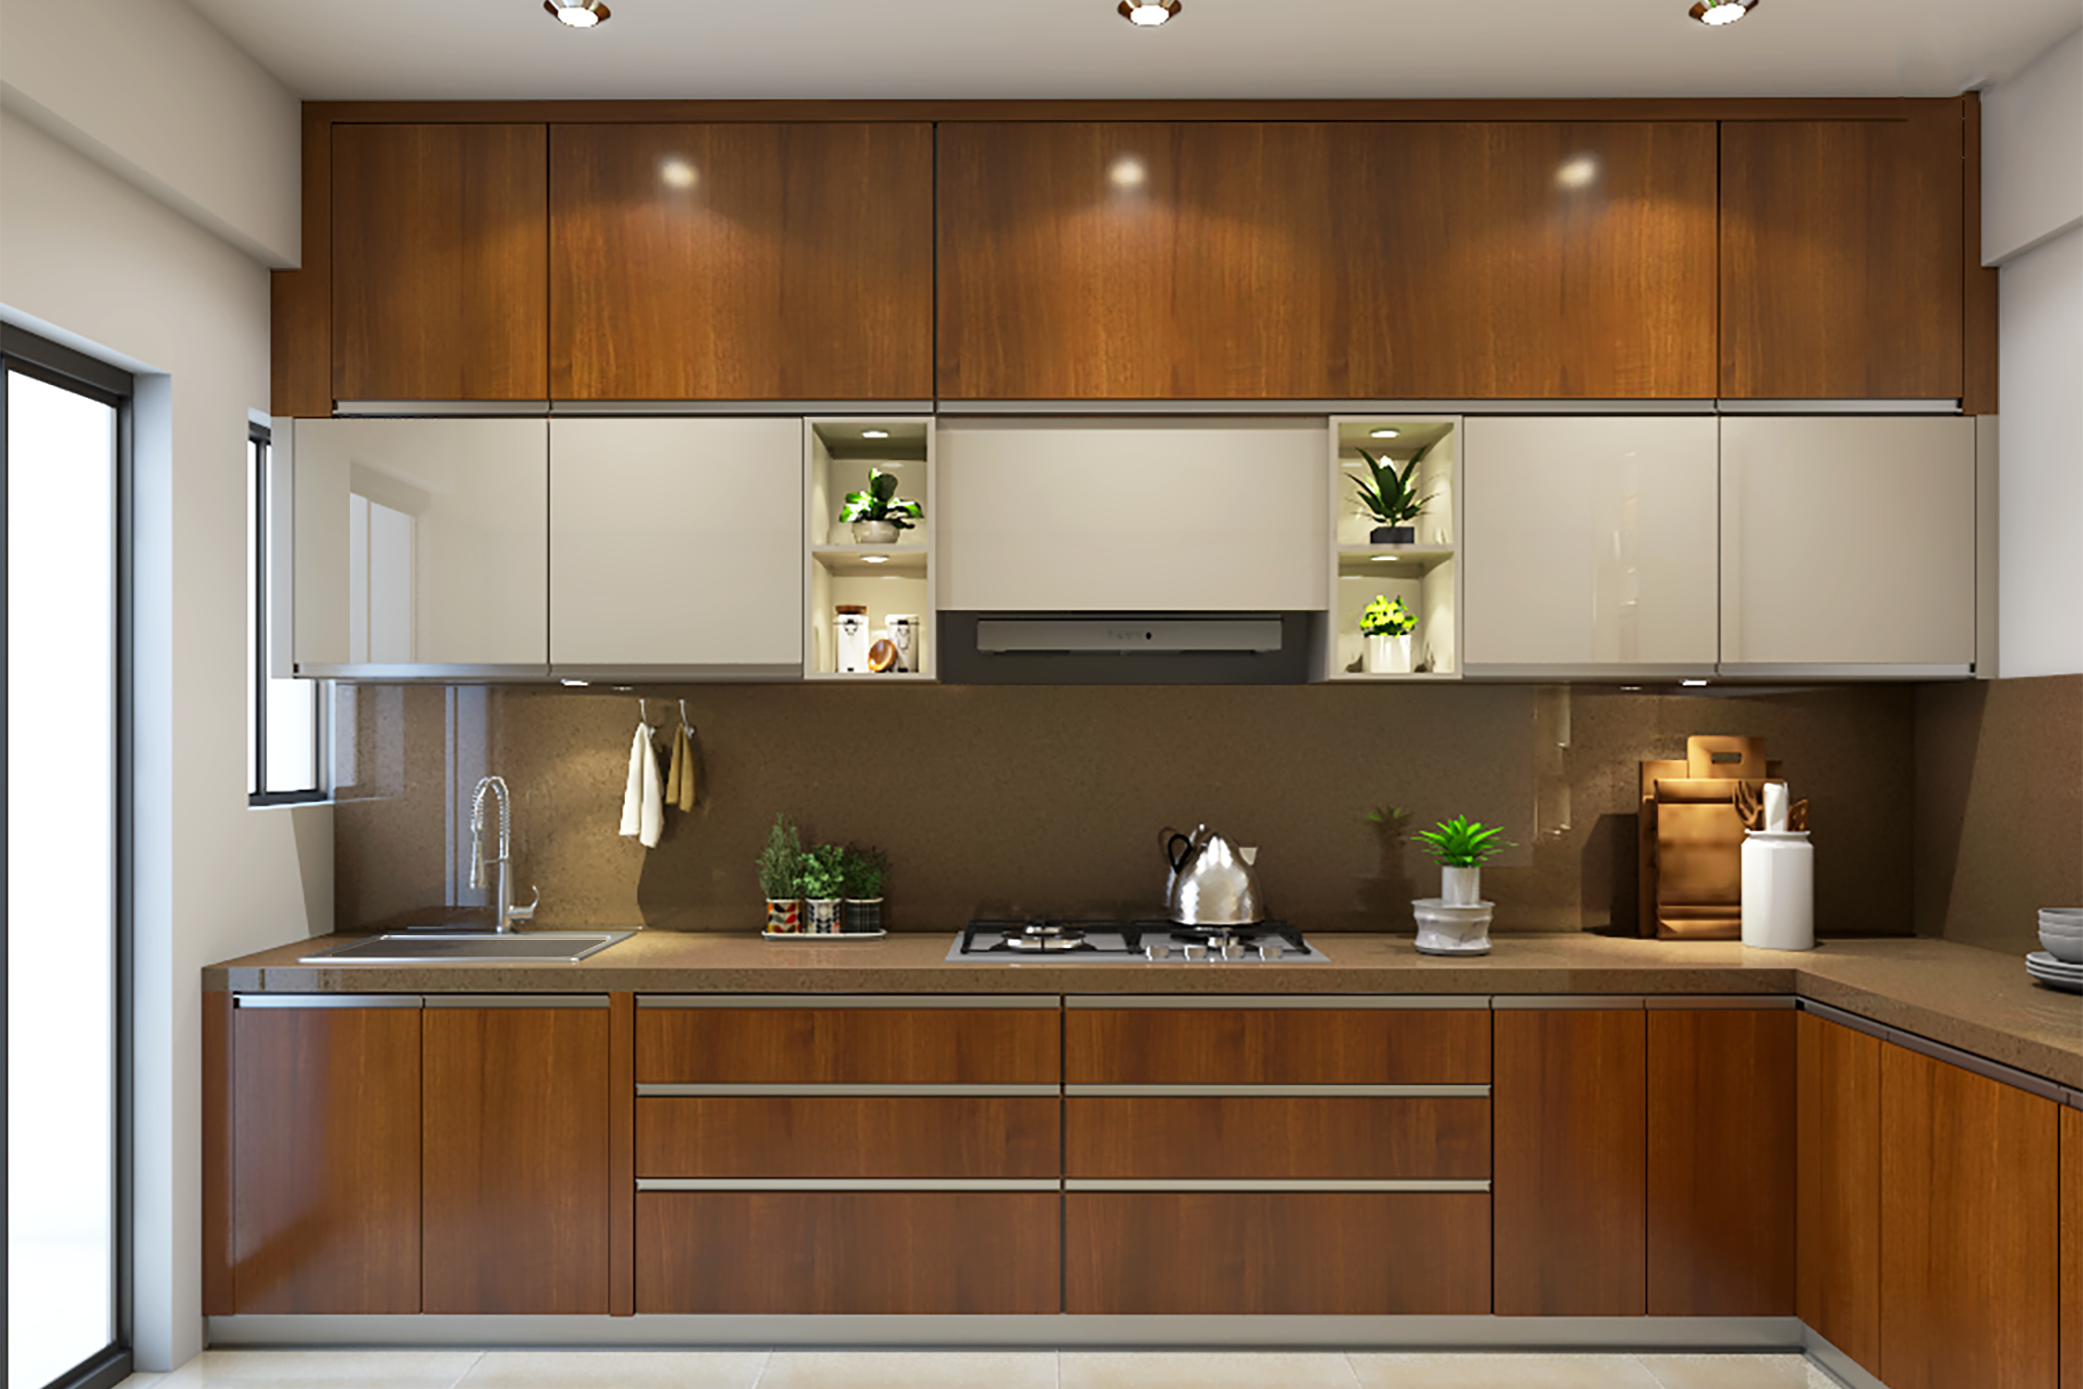 Spacious Modern L-Shaped Kitchen Design With Wooden Cabinets